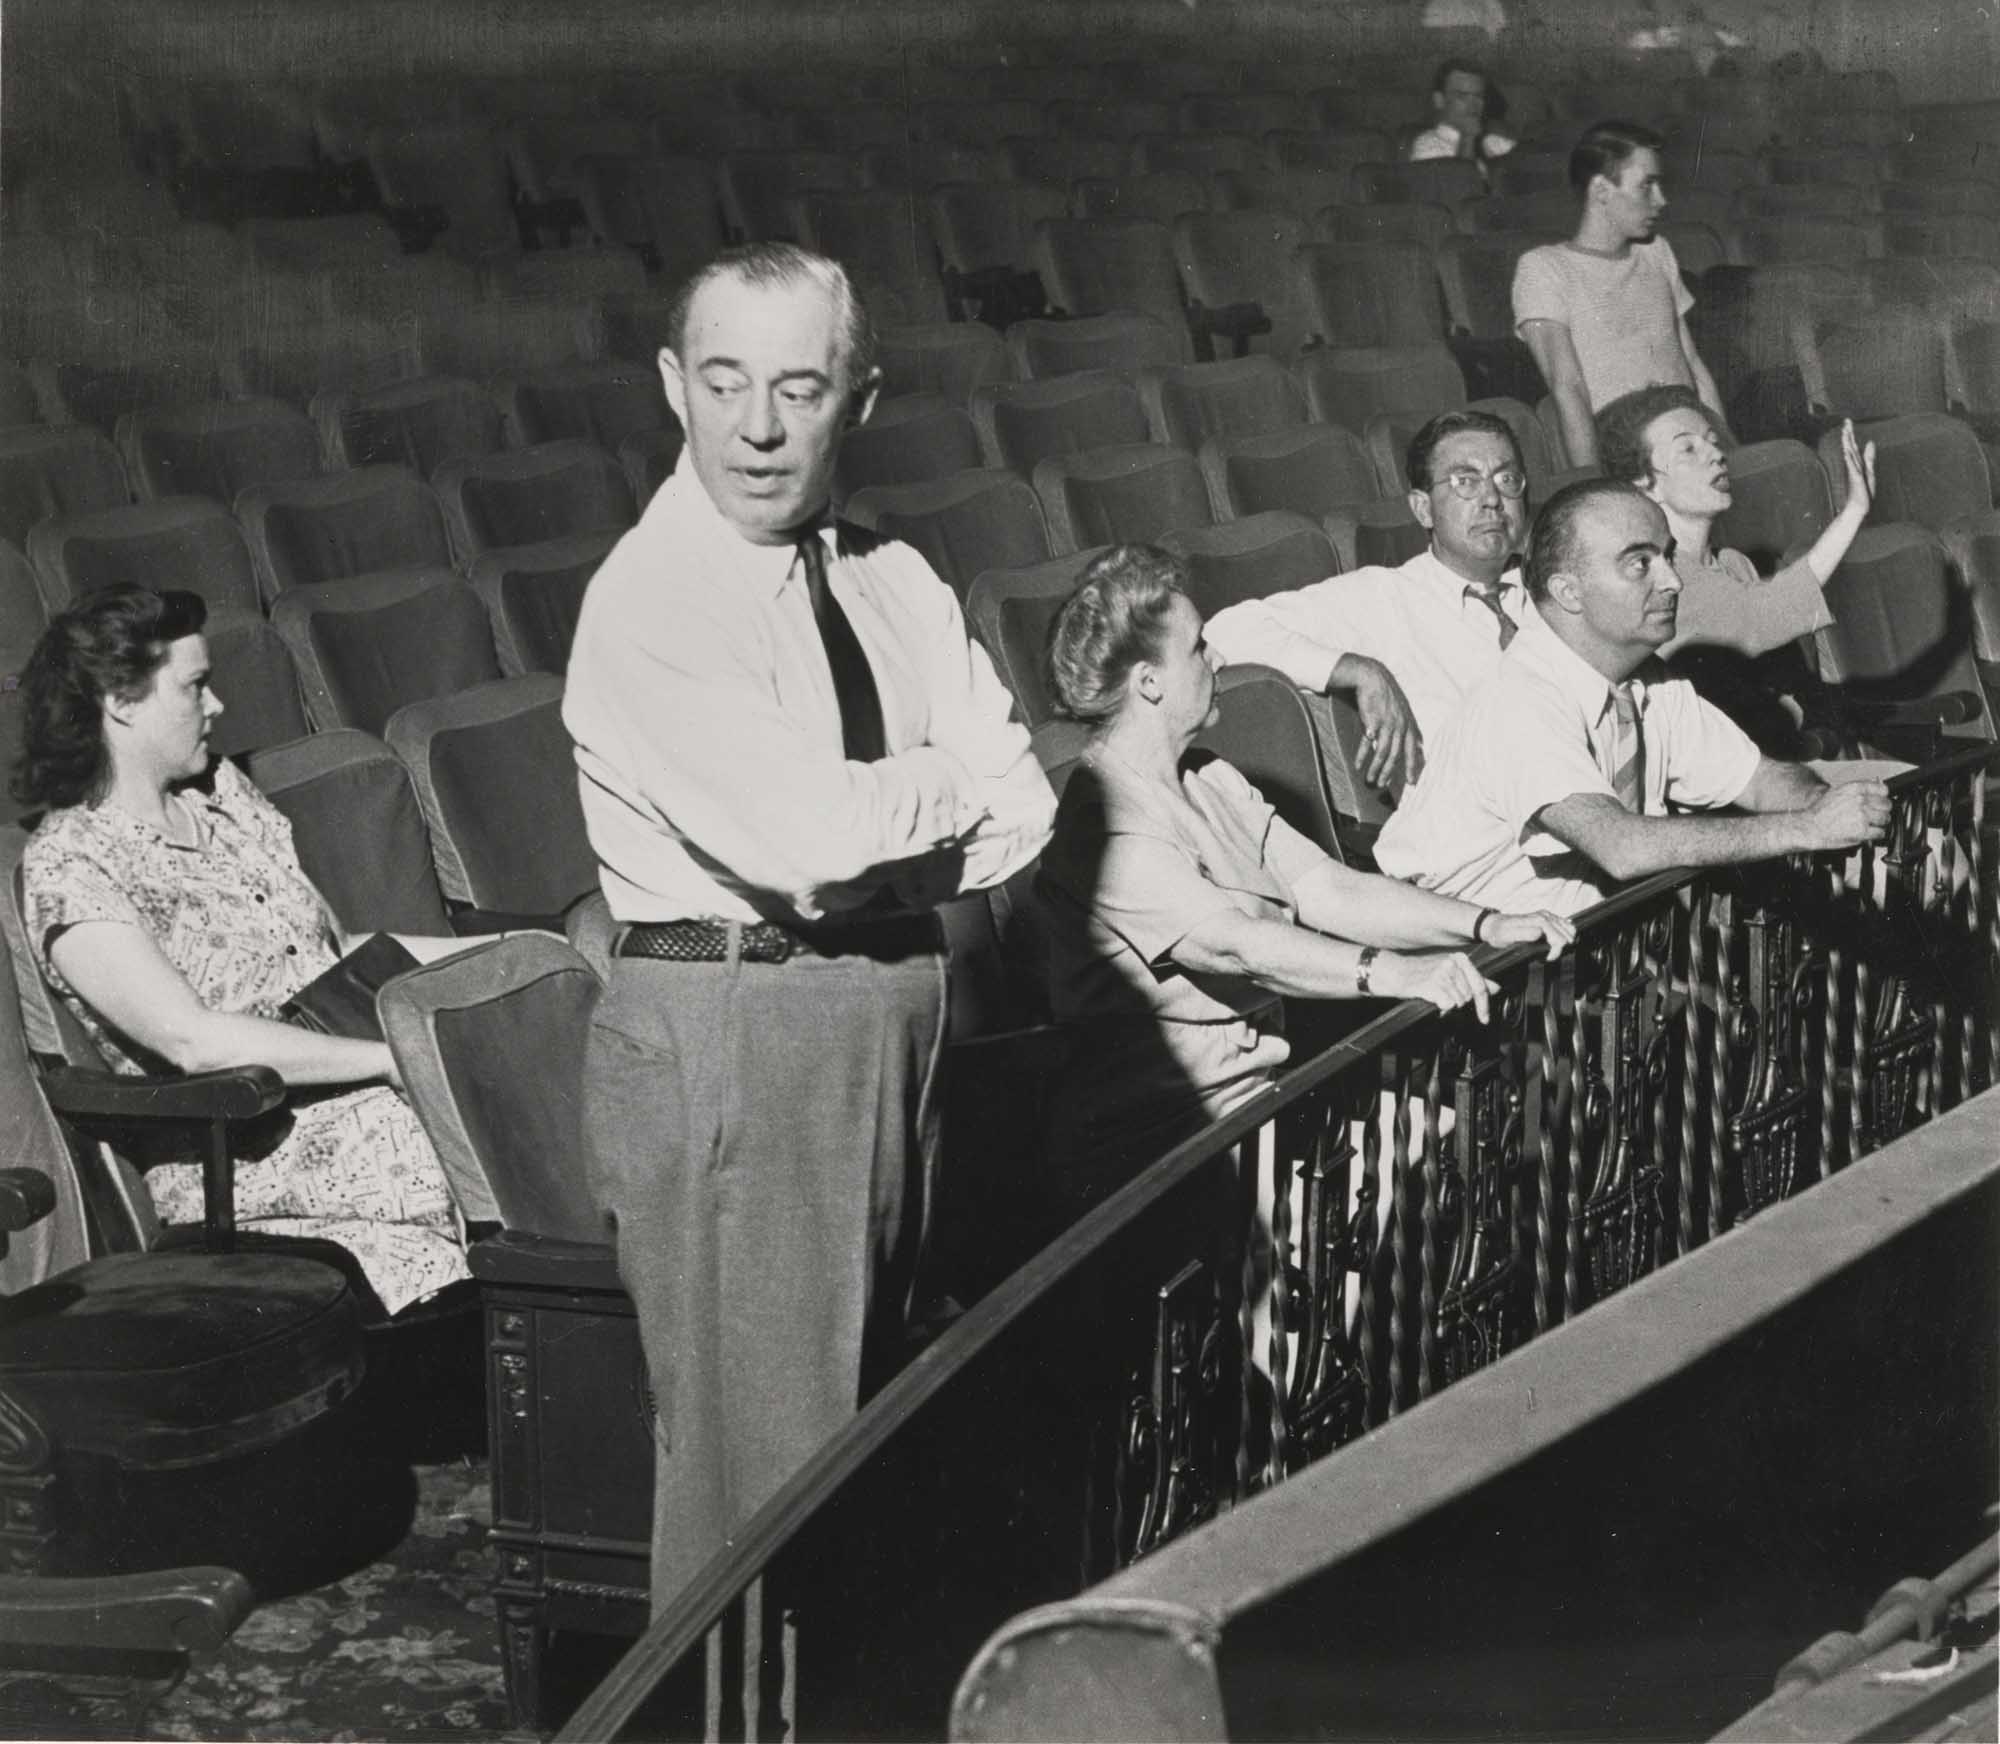 A photo from the 1947 Broadway rehearsals of Allegro.